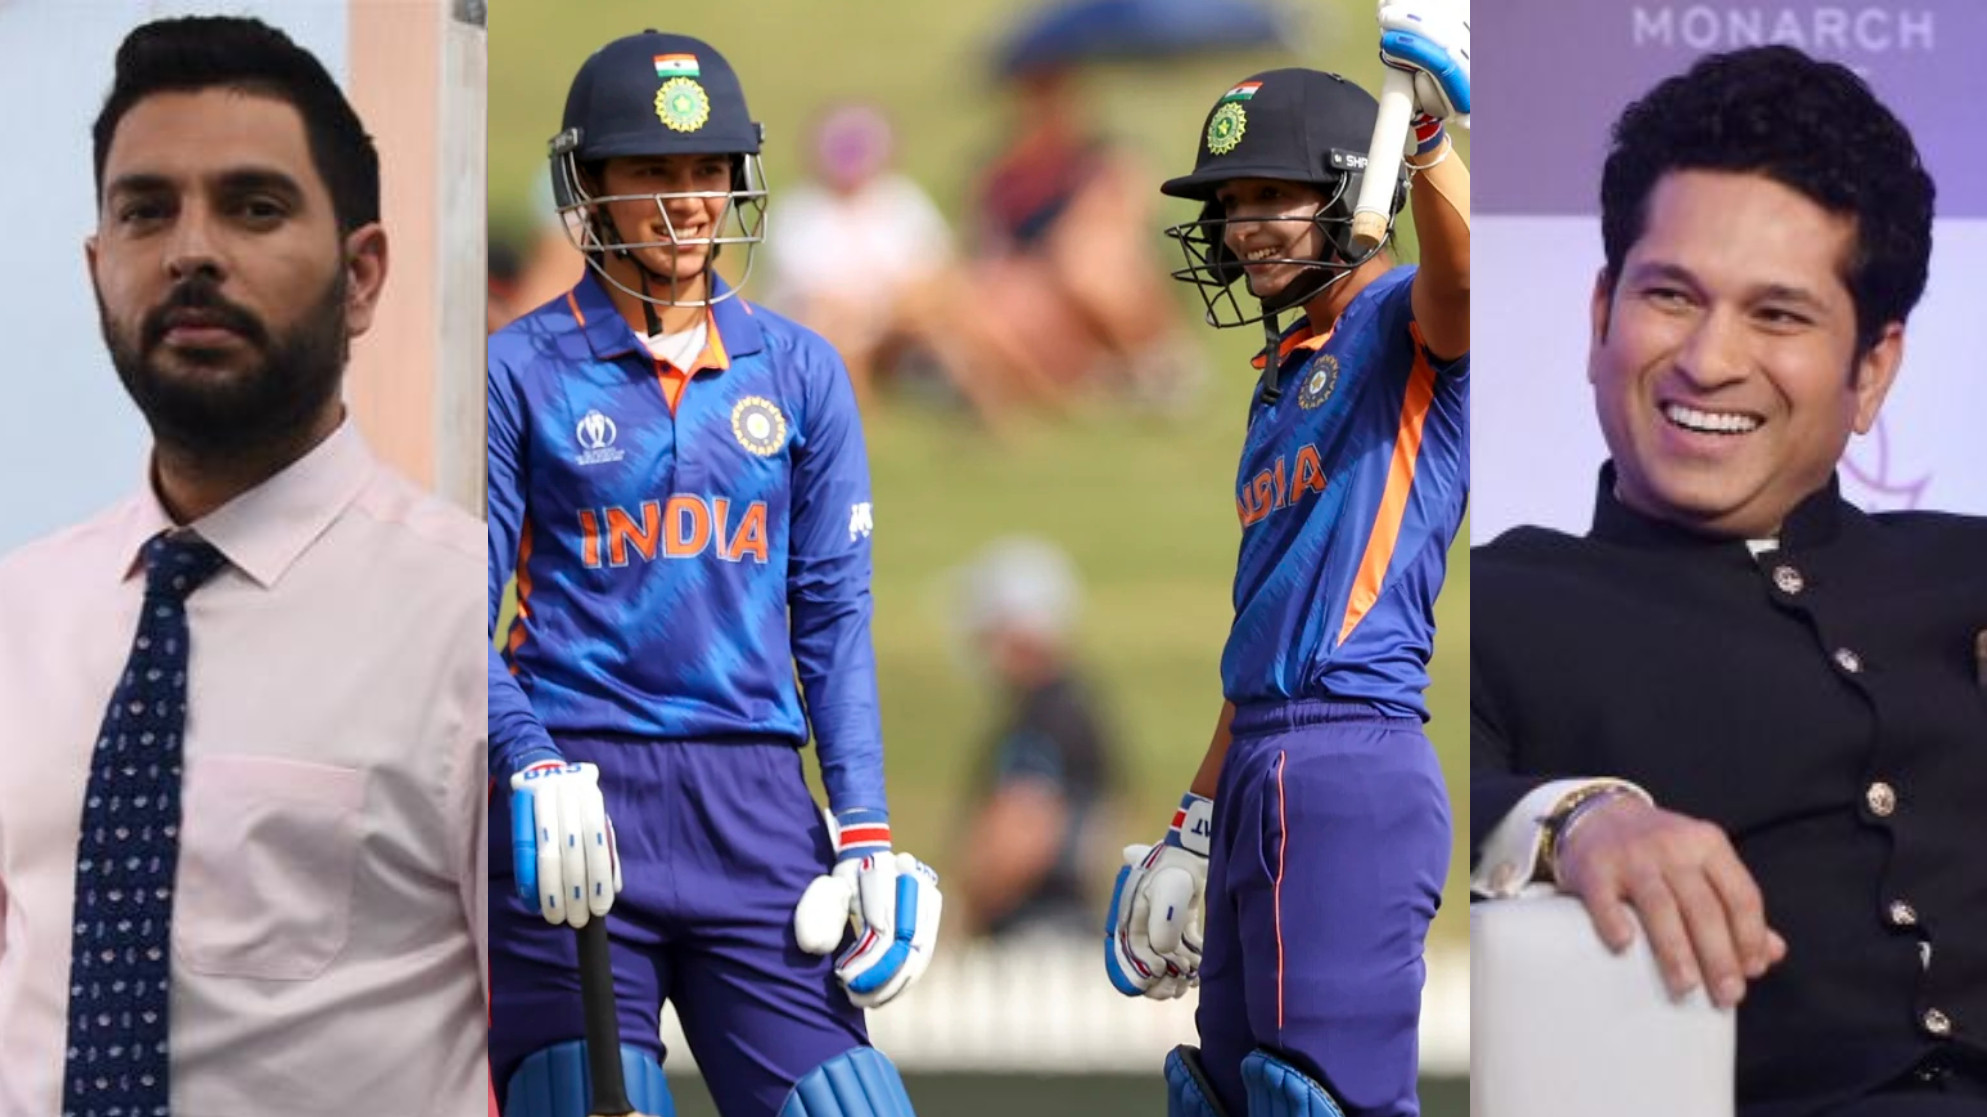 CWC 2022: Cricket fraternity lauds Smriti Mandhana and Harmanpreet Kaur as their tons helps India to 317/8